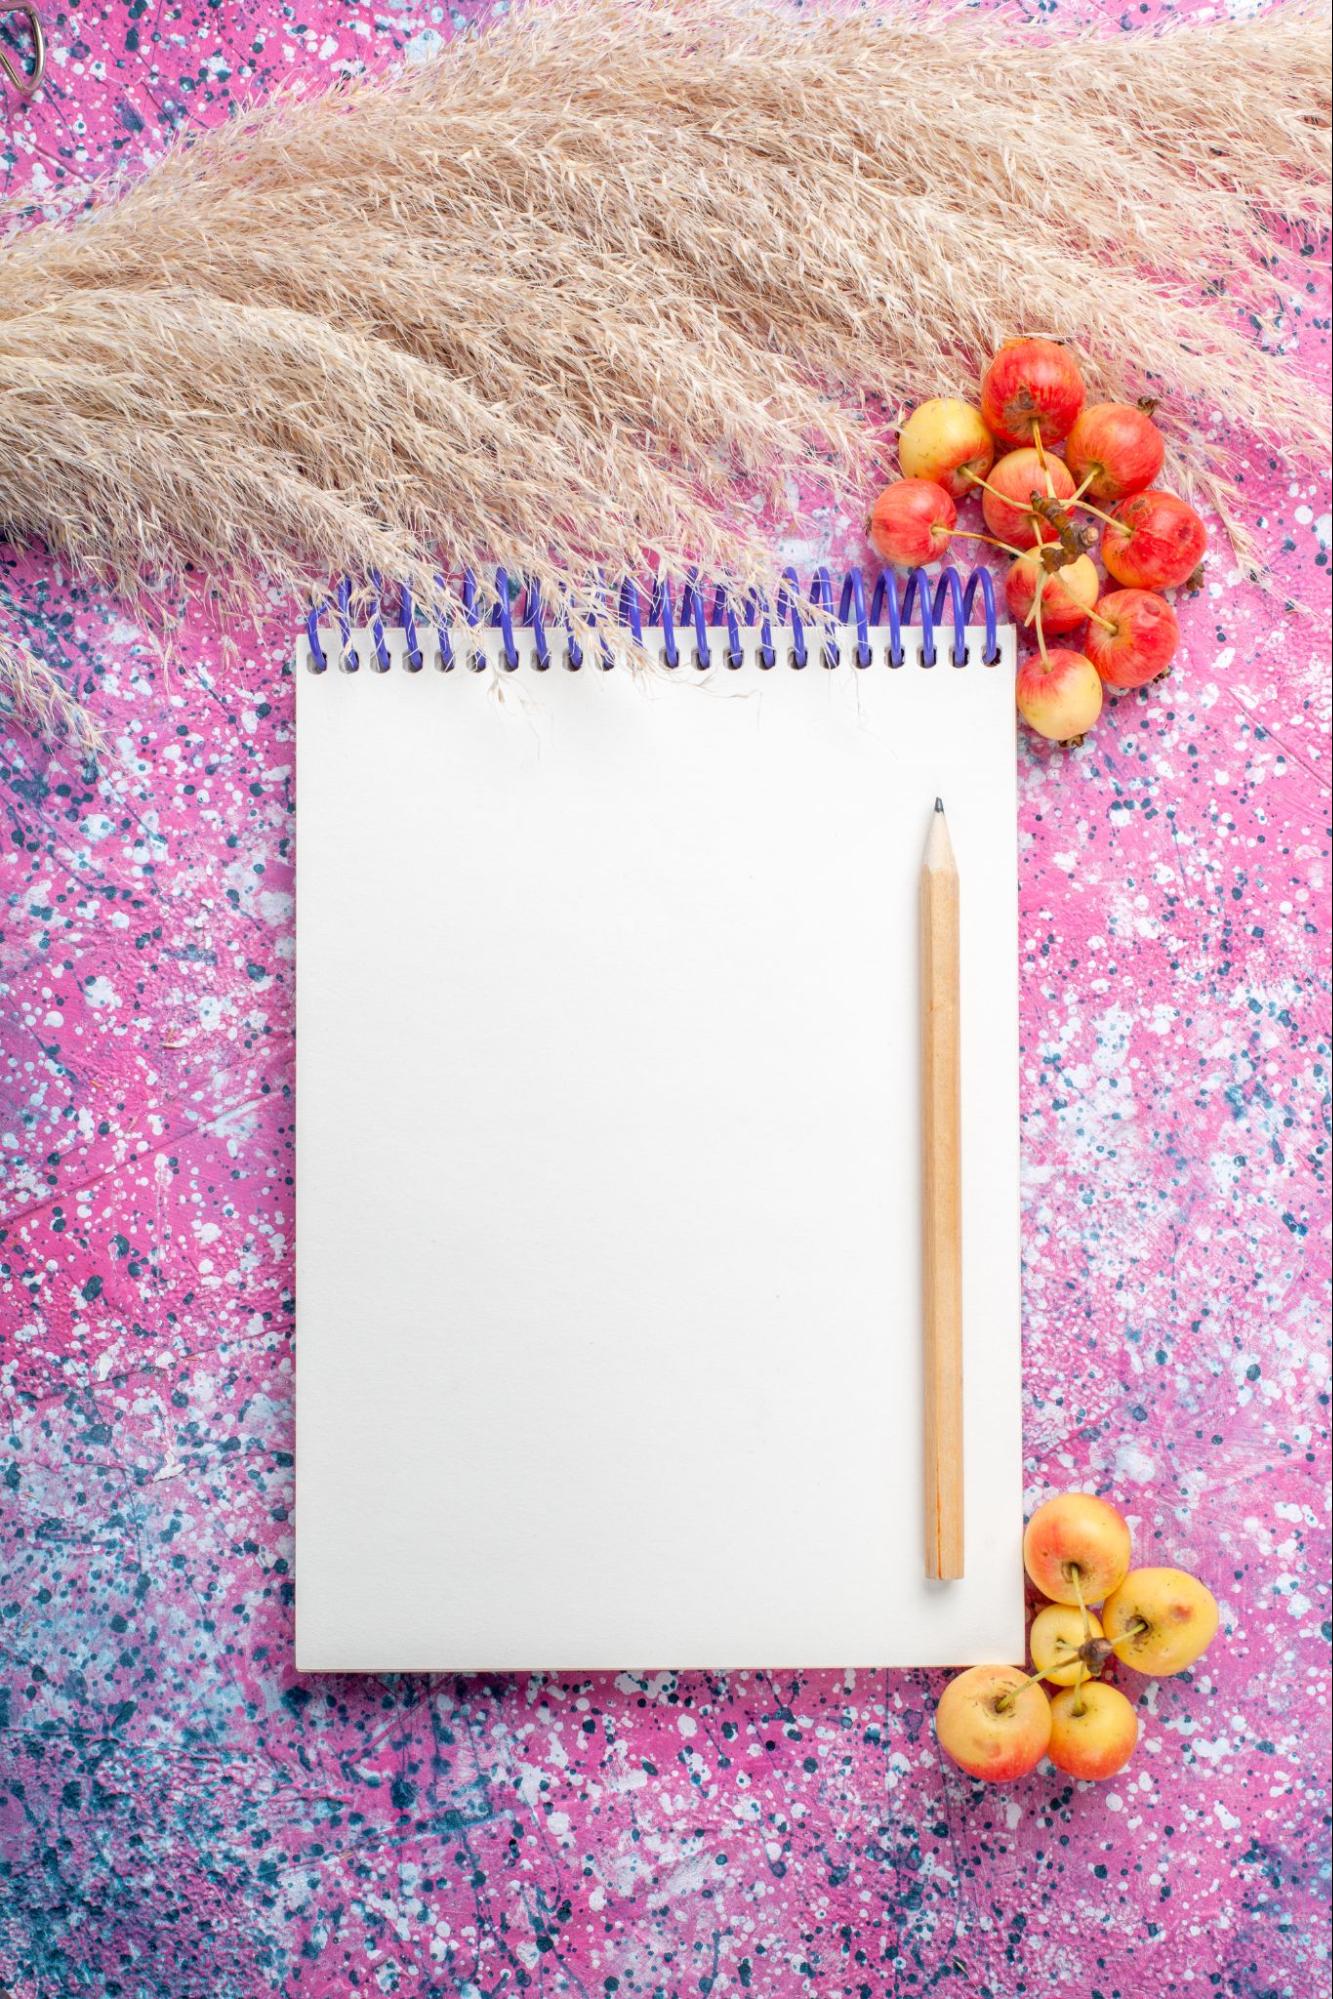 Artistic Notepad and Pencil on Vibrant Background for Birthday Return Gift Ideas.